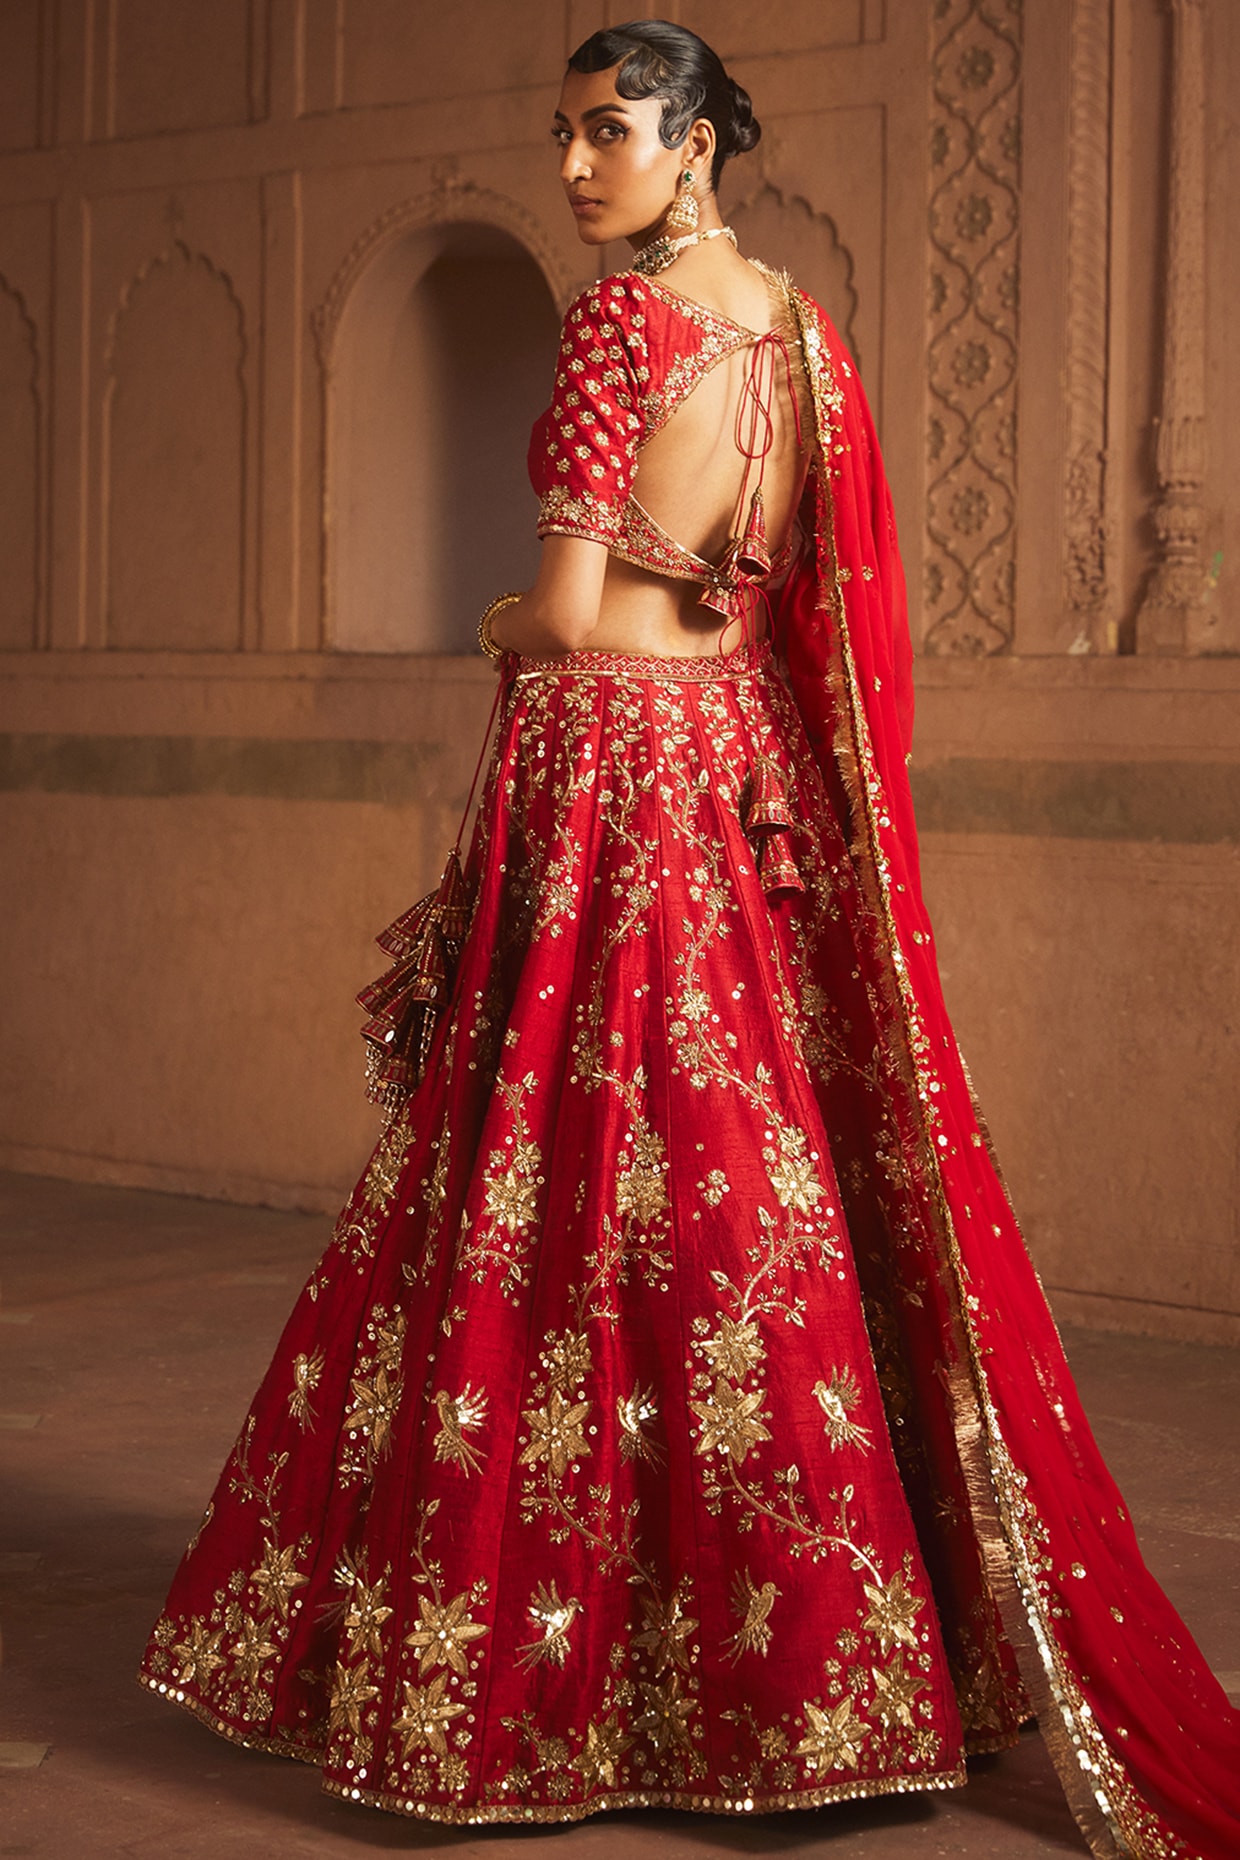 Red Bridal Expensive Lehenga Choli, this collection is velvet,